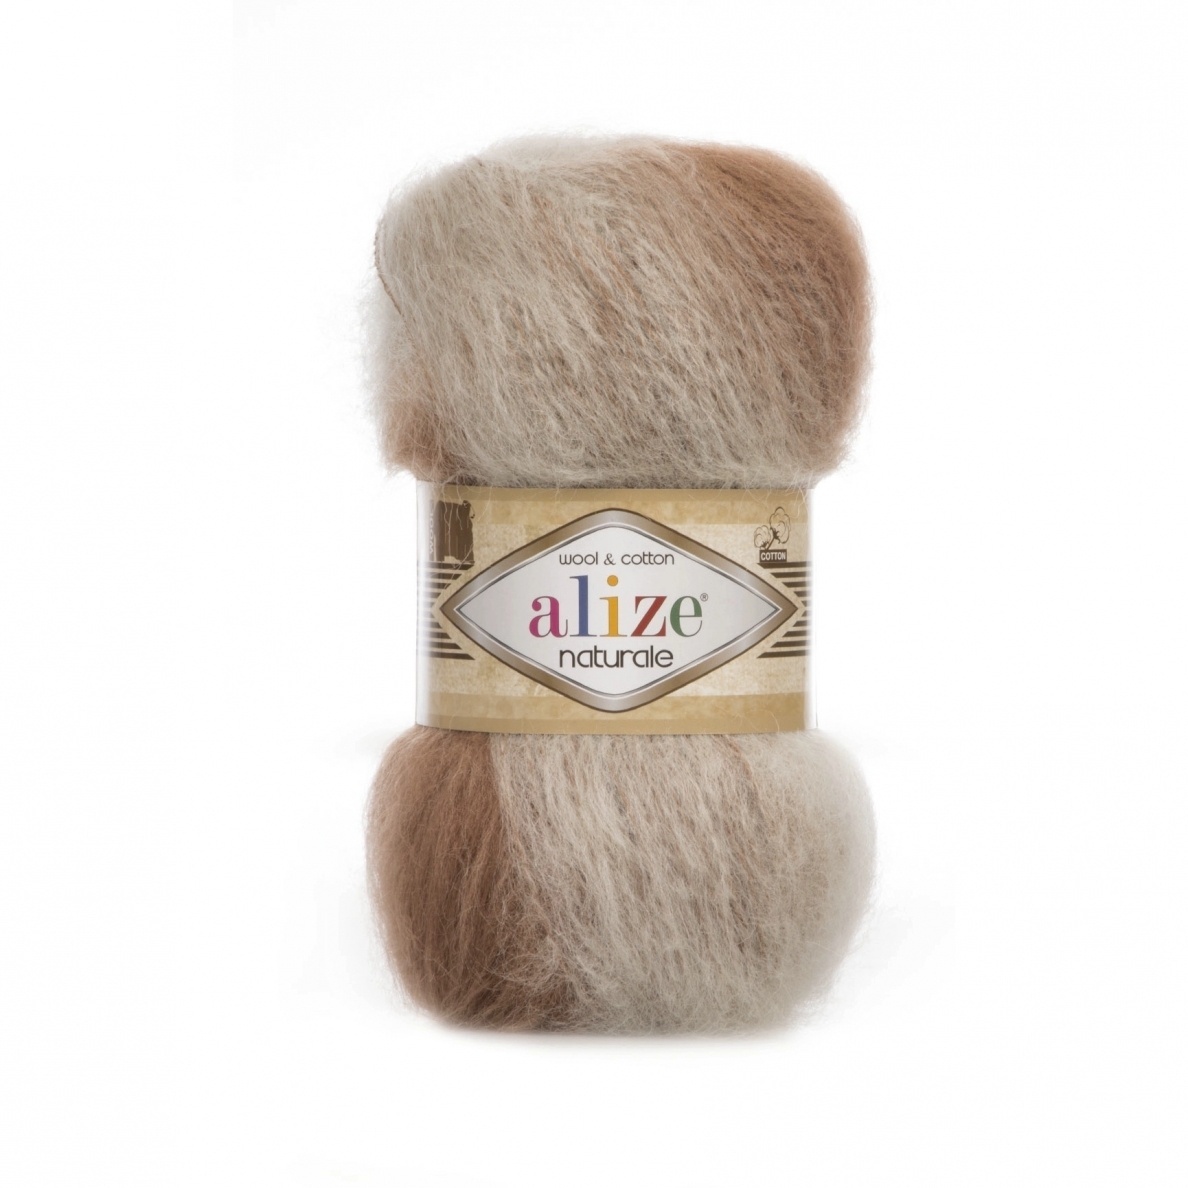 Alize Naturale, 60% Wool, 40% Cotton, 5 Skein Value Pack, 500g фото 1